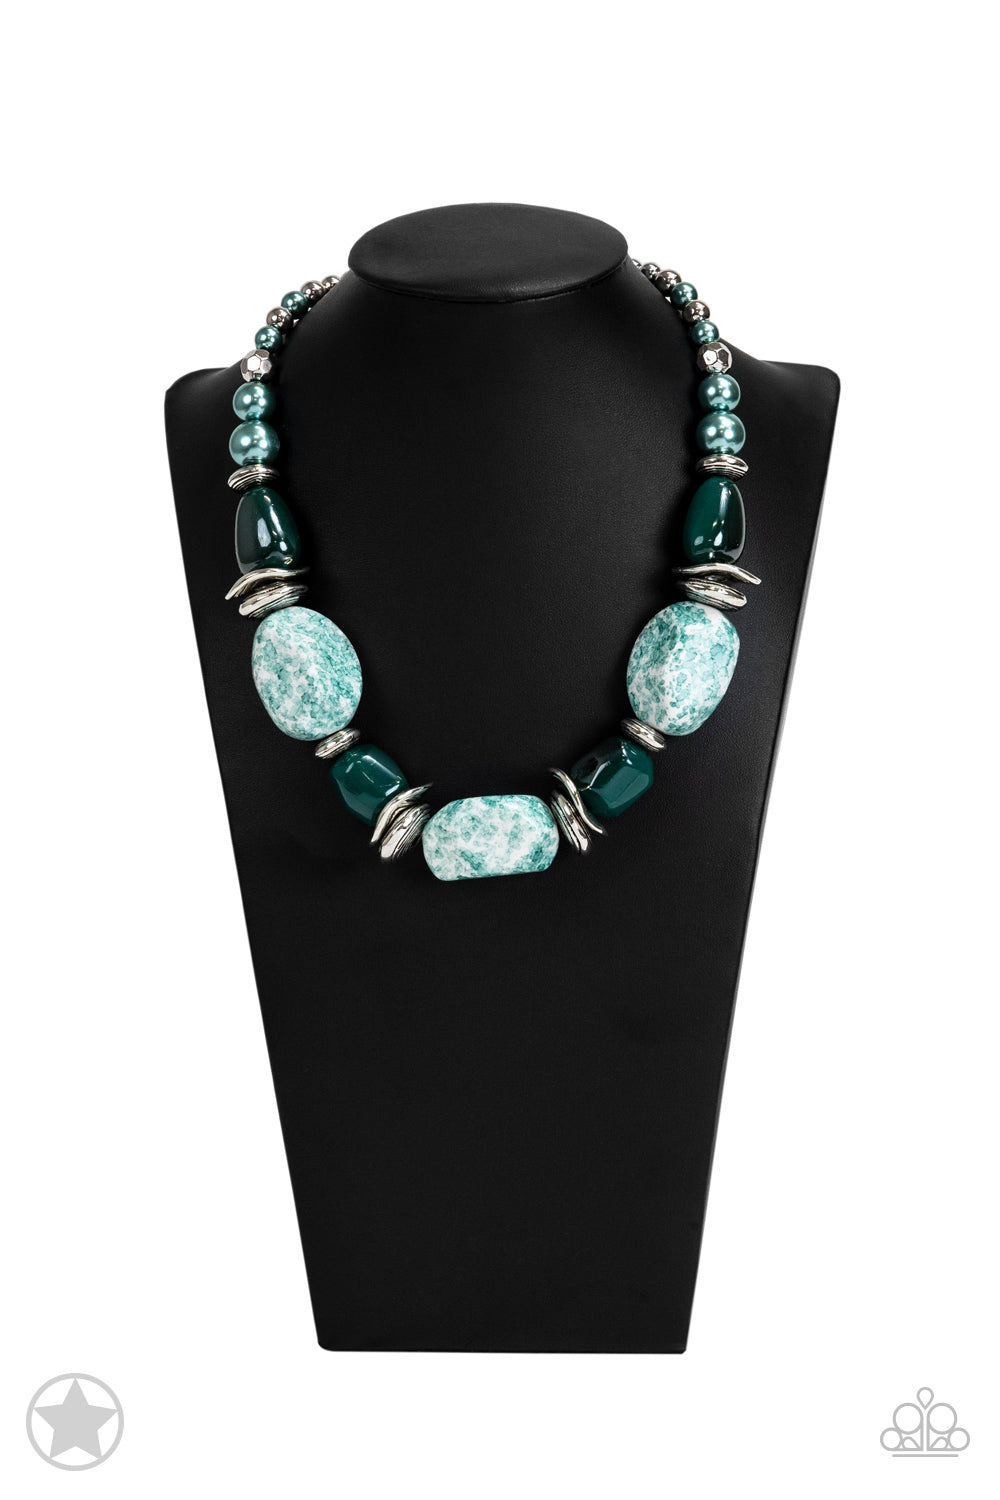 In Good Glazes - Blue / Teal Green Chunky Bead Blockbuster Short Necklace